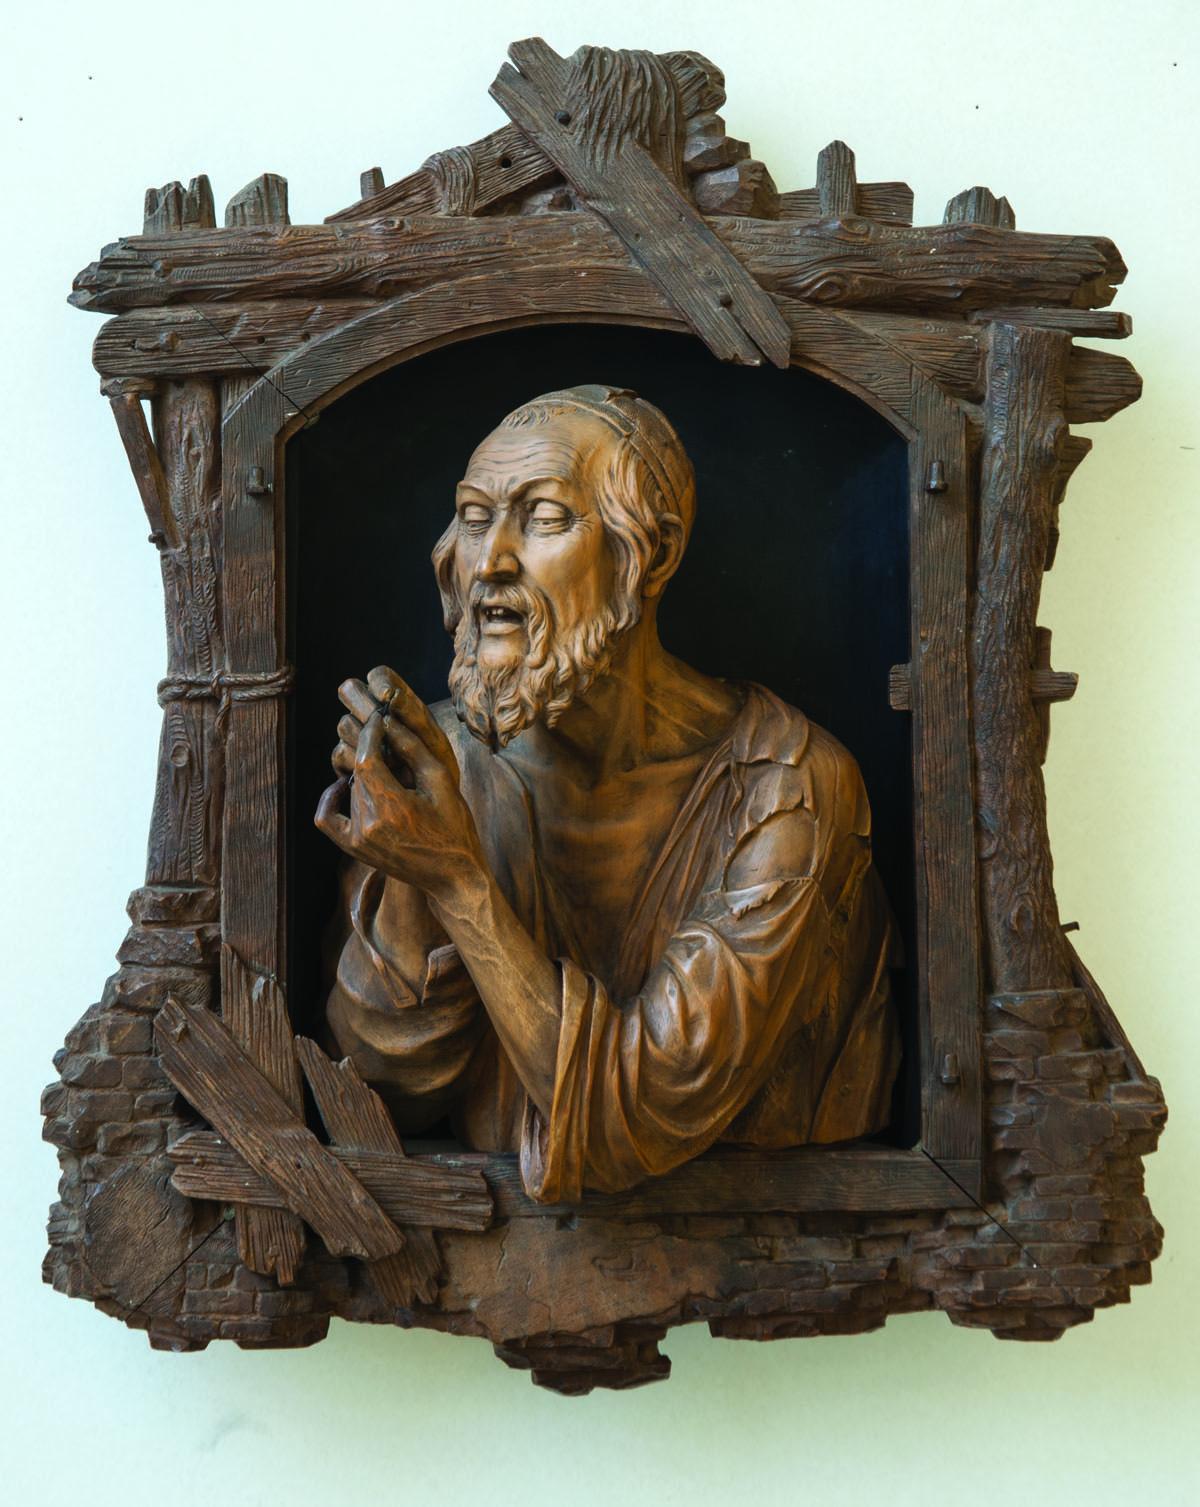 Wood-carving of a man in skullcap examining an object in his hands.